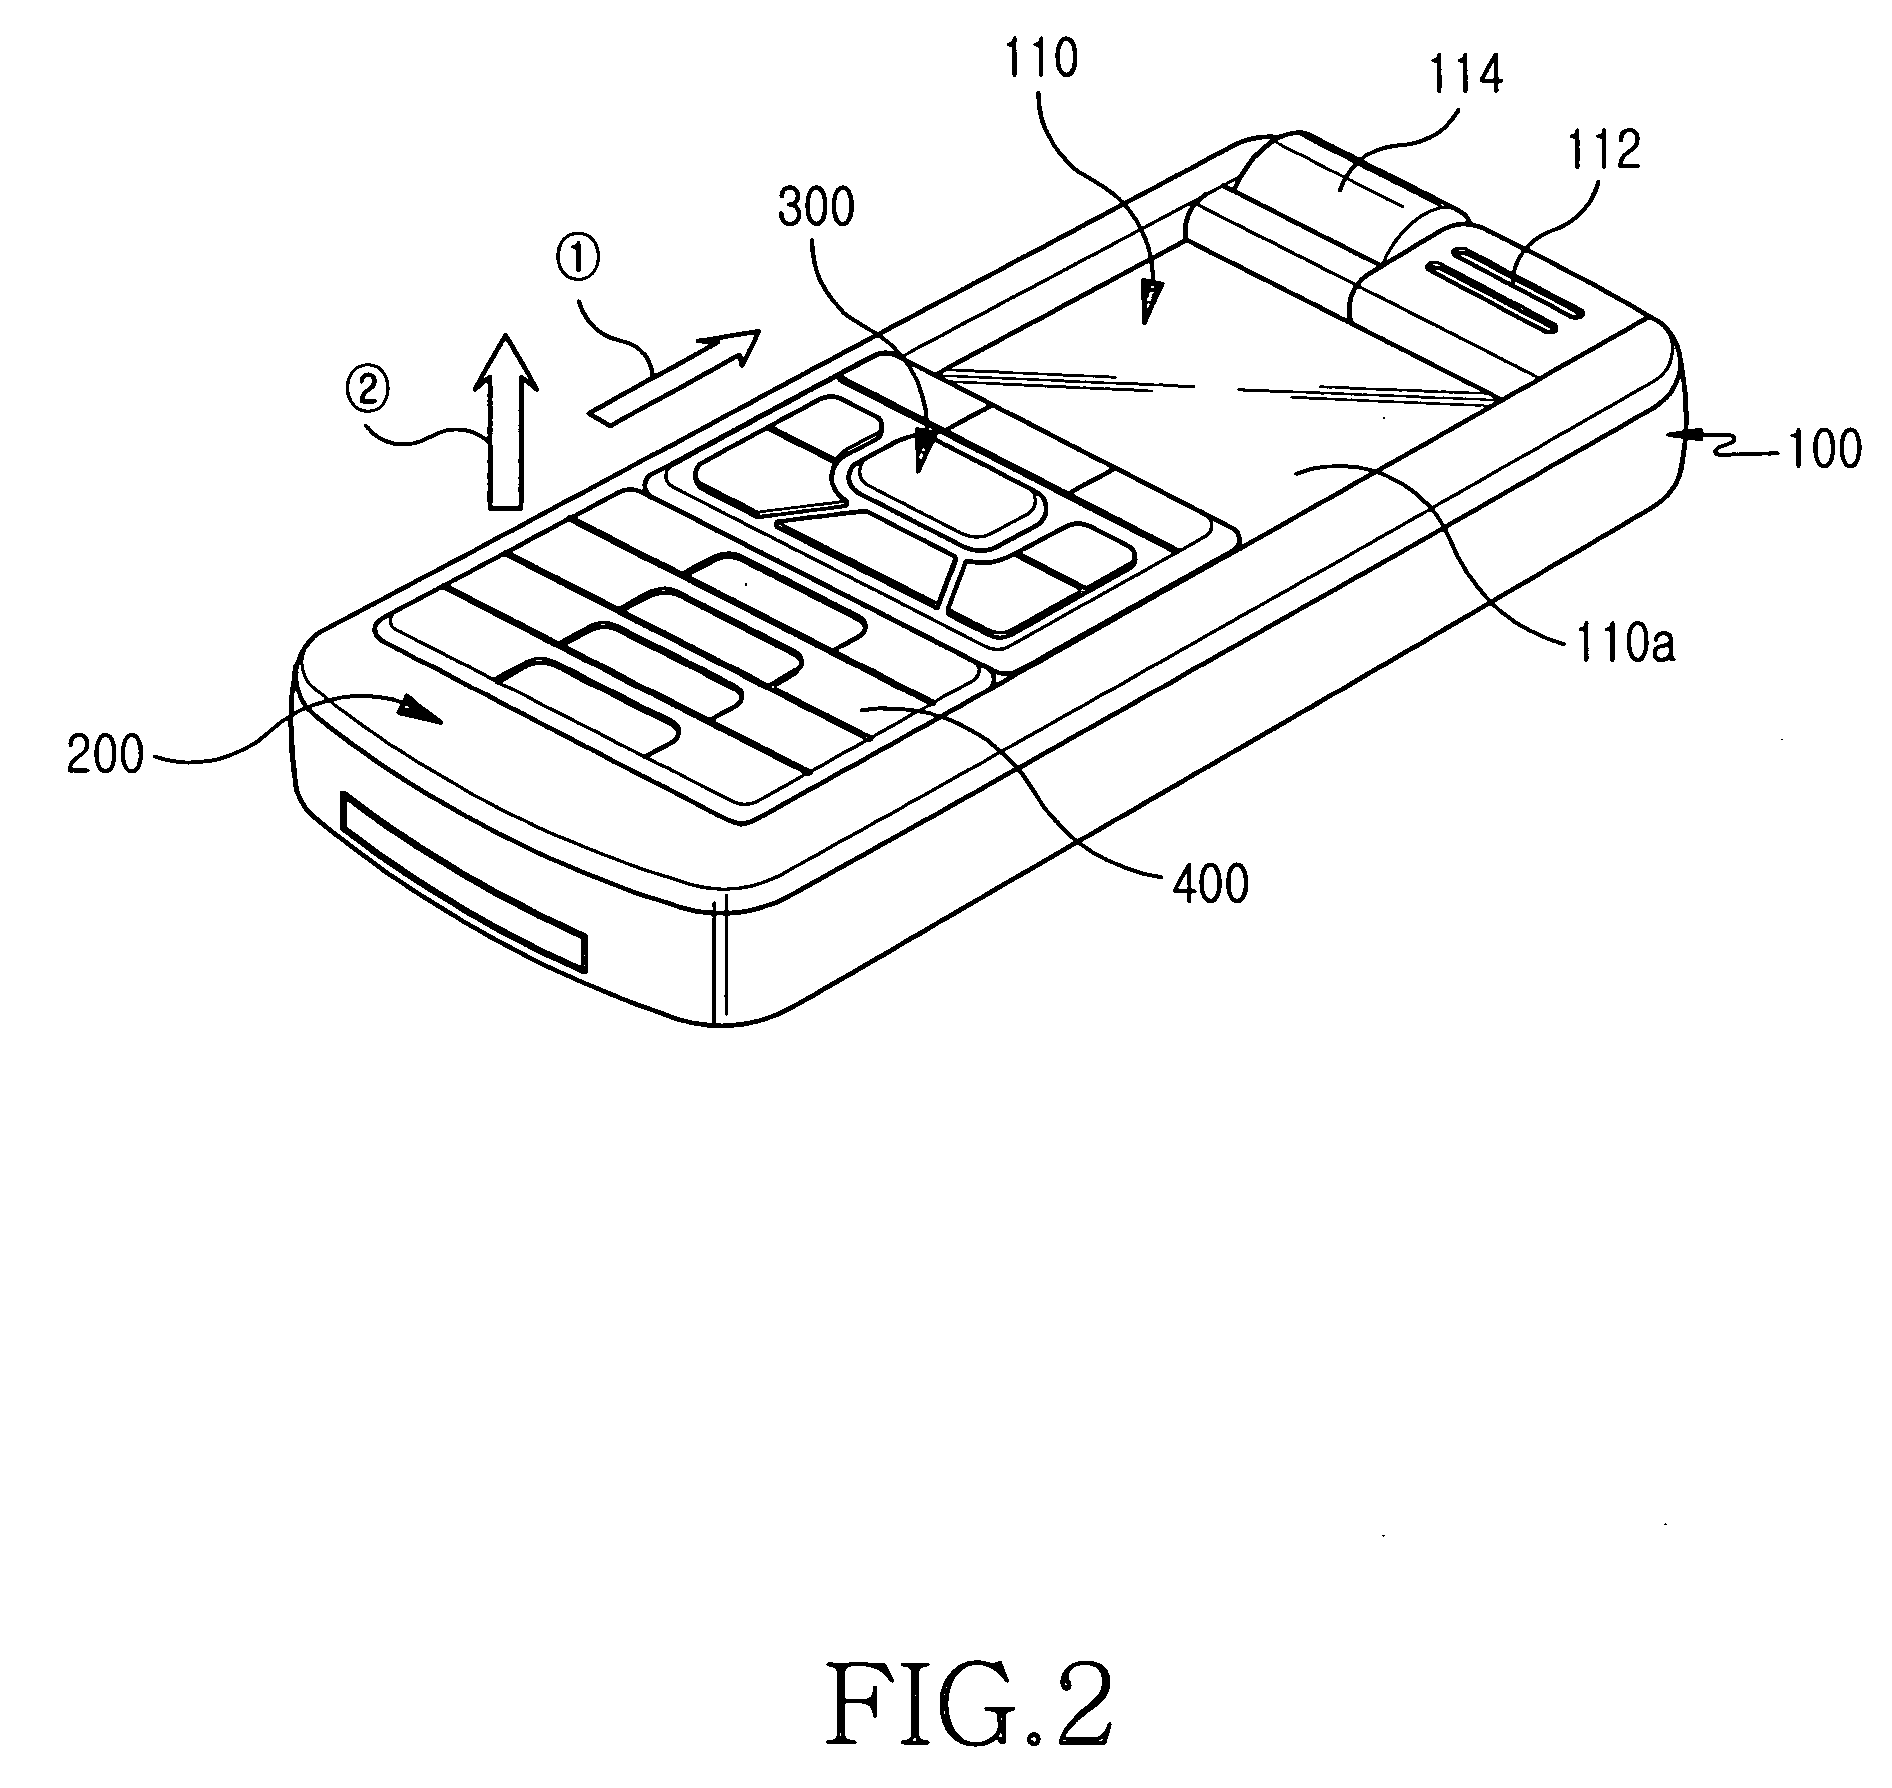 Portable communication device with sliding and pop-up type keypads